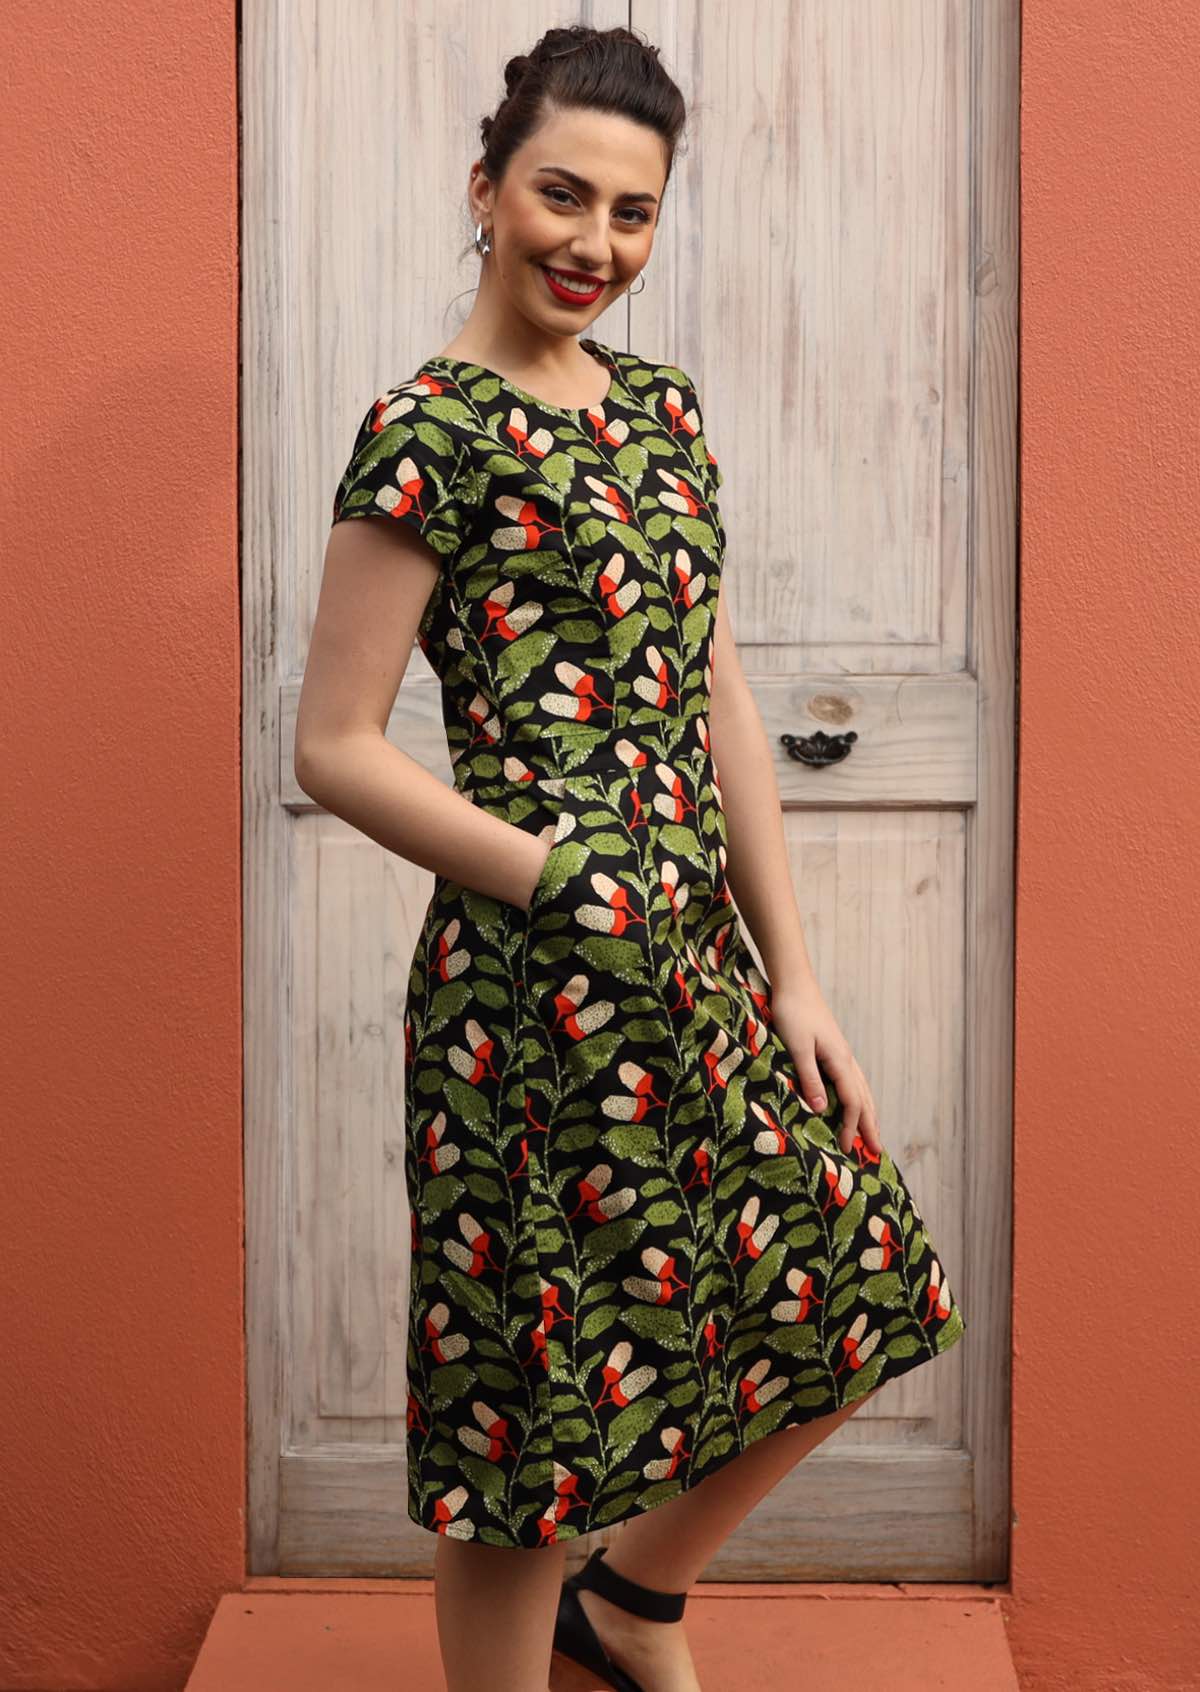 Model wears green orange and white speckled botanical print with black base cotton dress